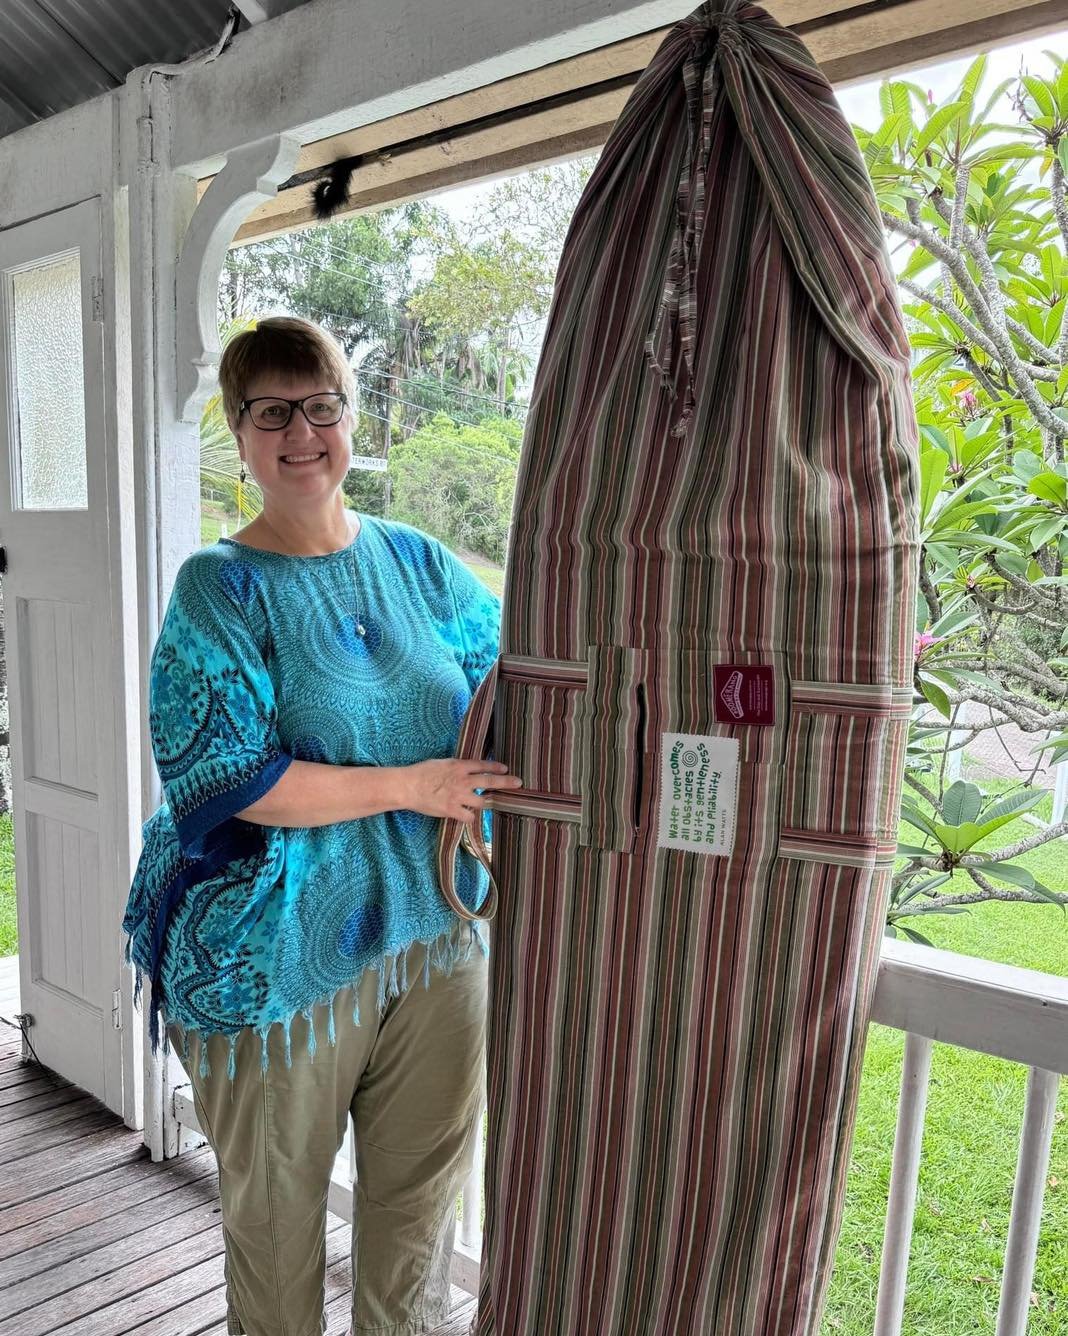 I spoke recently in parliament about this great partnership between local groups Trek2Health and Boomerang Bags The Gap &amp; Surrounds who are making the surfboard covers for these social enterprise.

Each surfboard bag cover is made of recycled mat